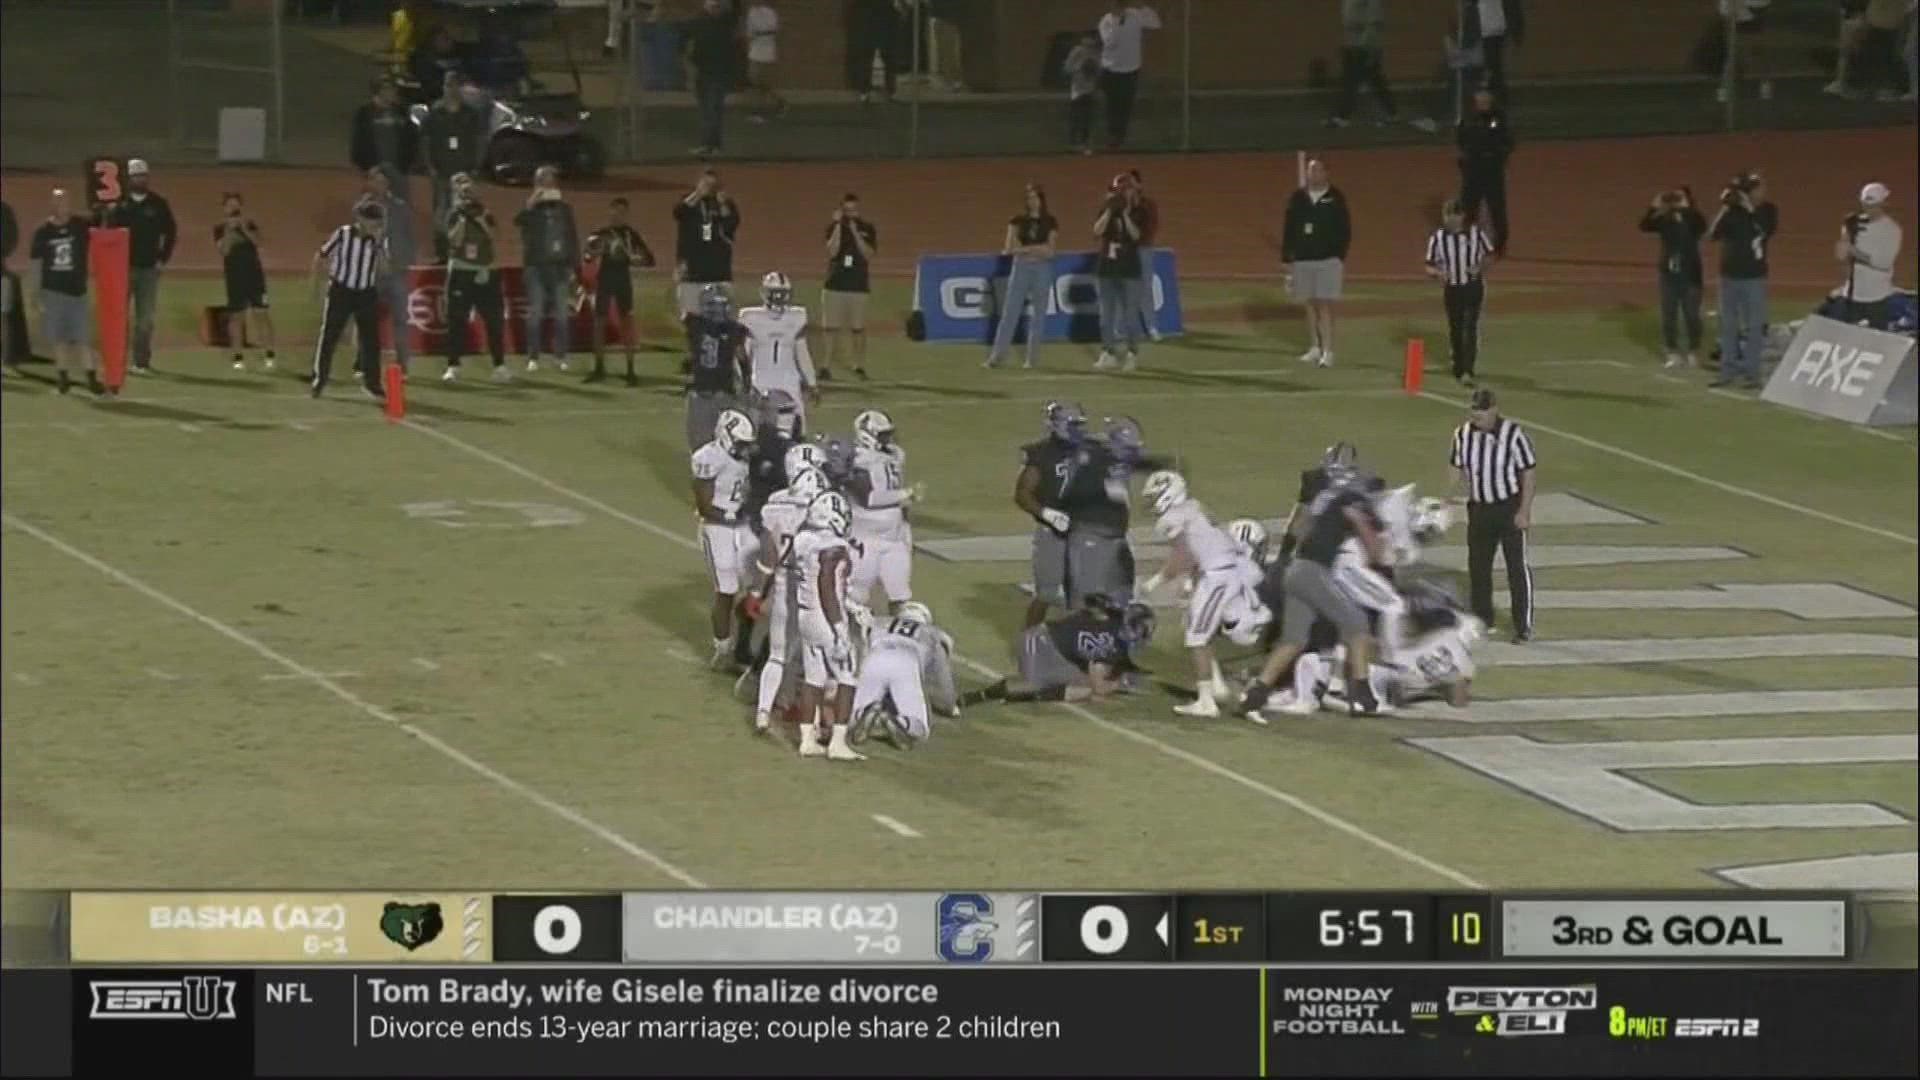 Basha takes down top-ranked Chandler on national television.